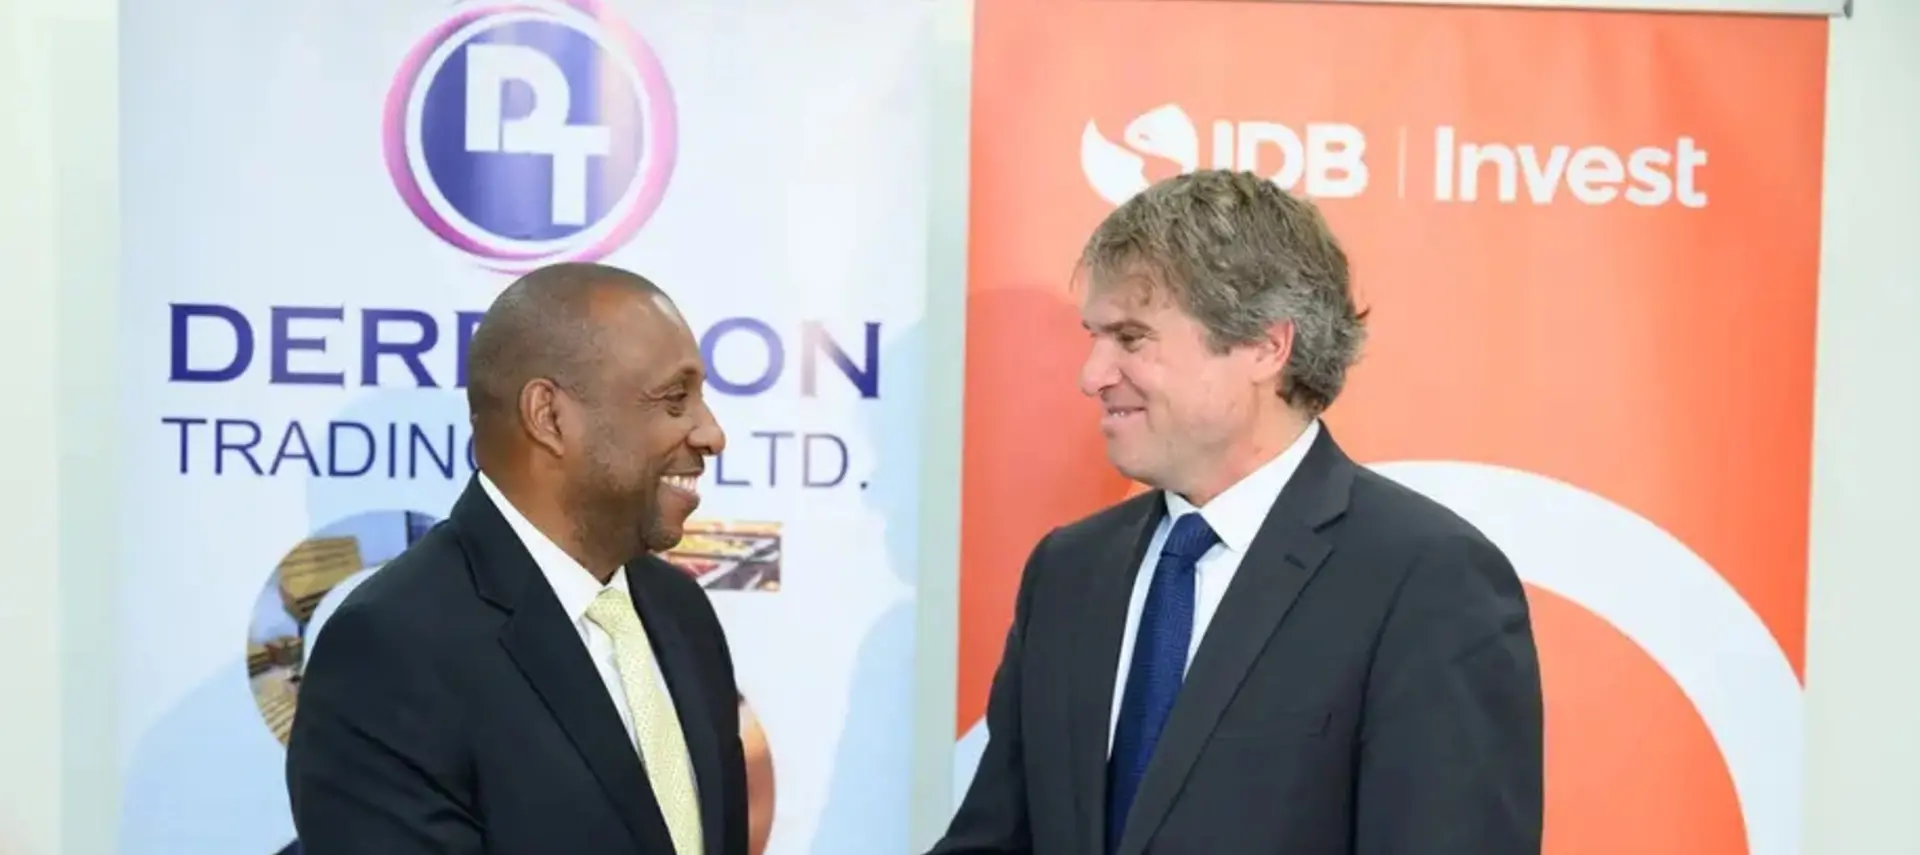 Derrimon and IDB Invests CEOs shaking hands